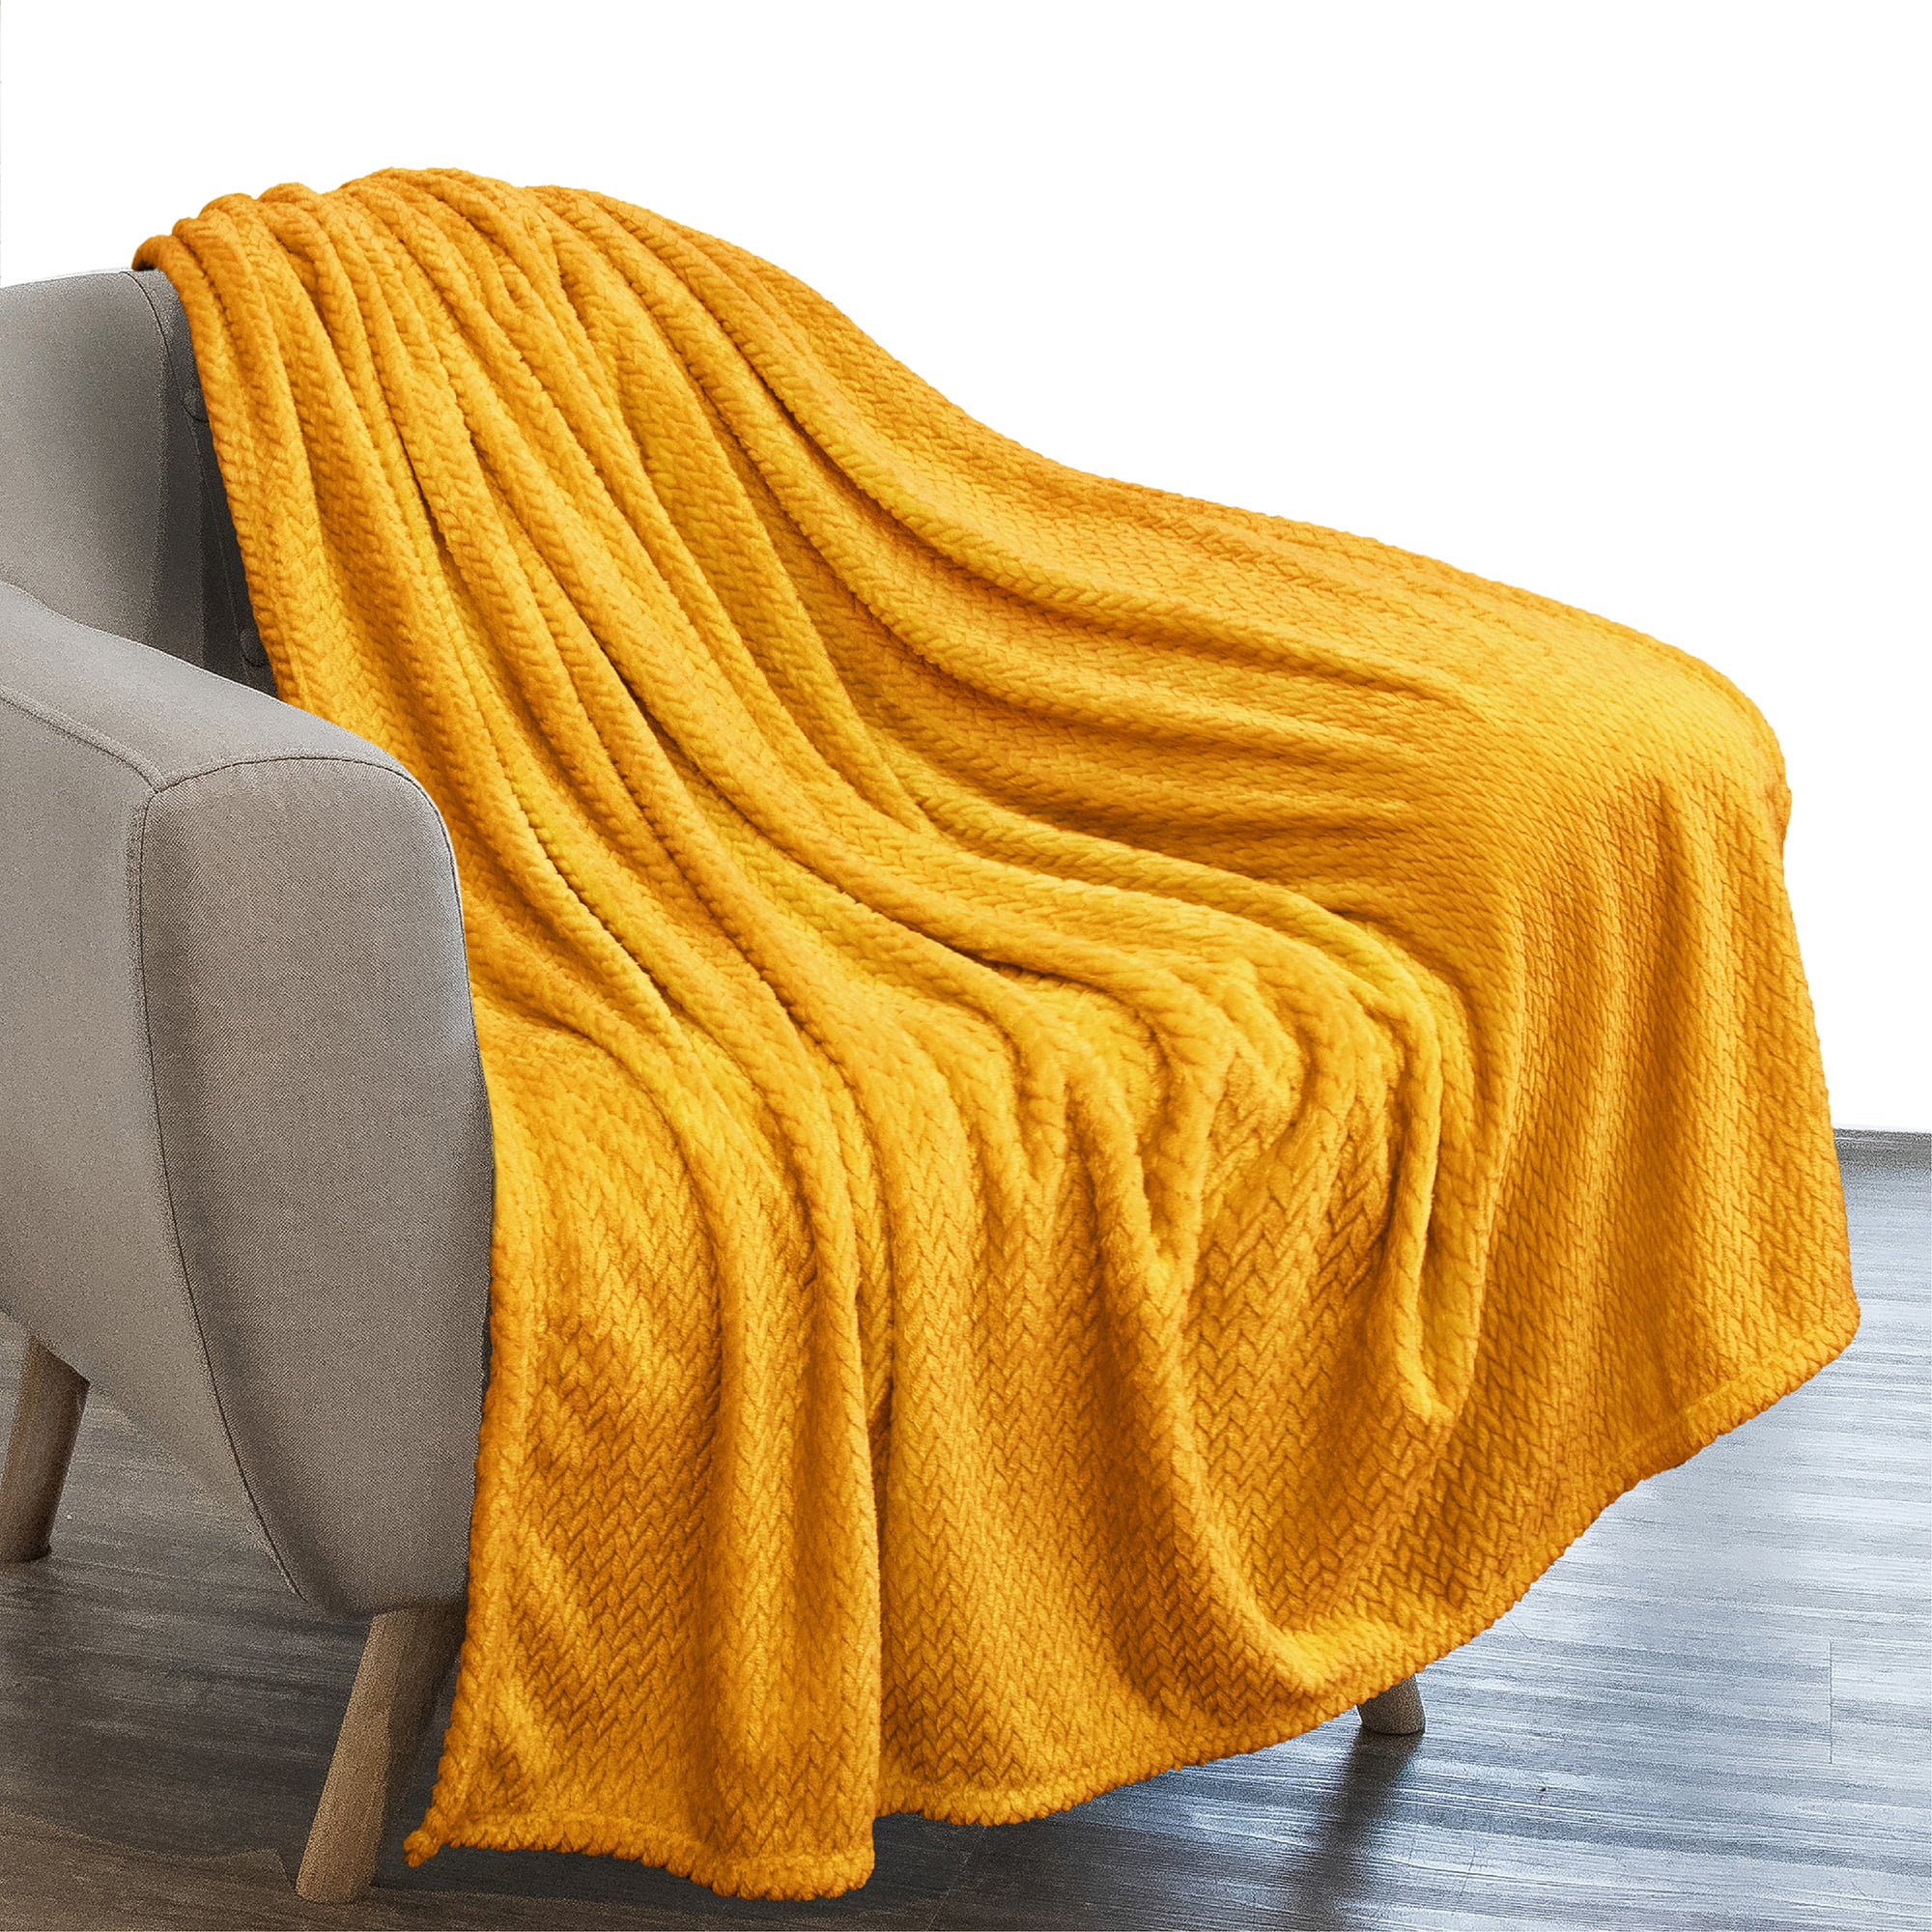 MUSTARD YELLOW PATTERN BLANKET SHERPA WARM AND COZY KING SIZE 1 PC